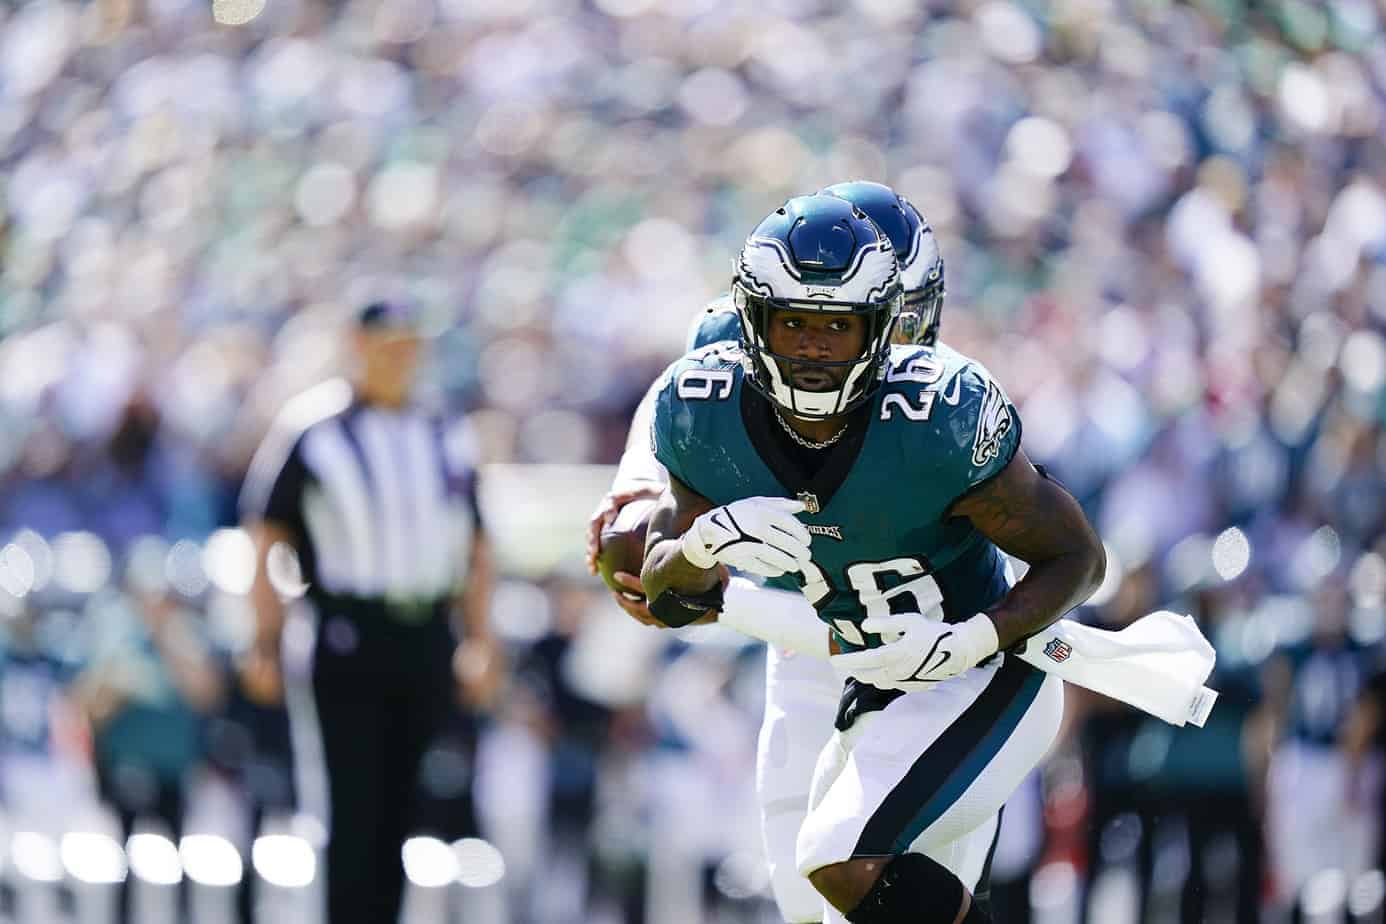 NFL best bets, betting odds, picks and predictions for Week 15 NFL Tuesday game Washington vs. Eagles using expert betting tools & simulations